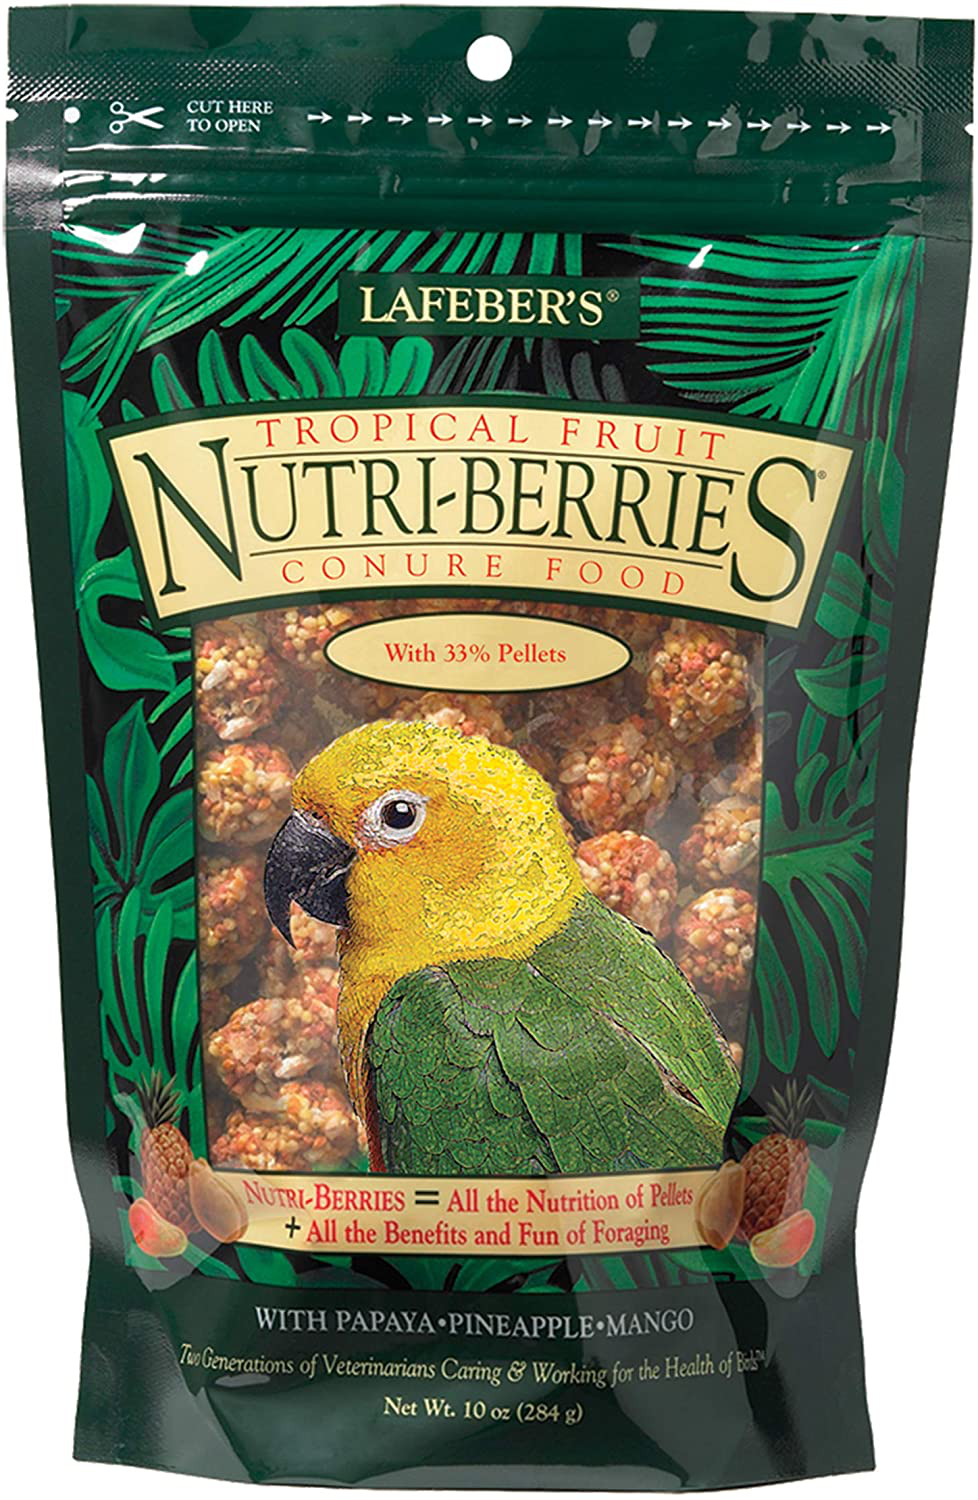 Lafeber Tropical Fruit Nutri-Berries Conure Food, Made with Non-Gmo and Human-Grade Ingredients, for Conures, 10 Oz